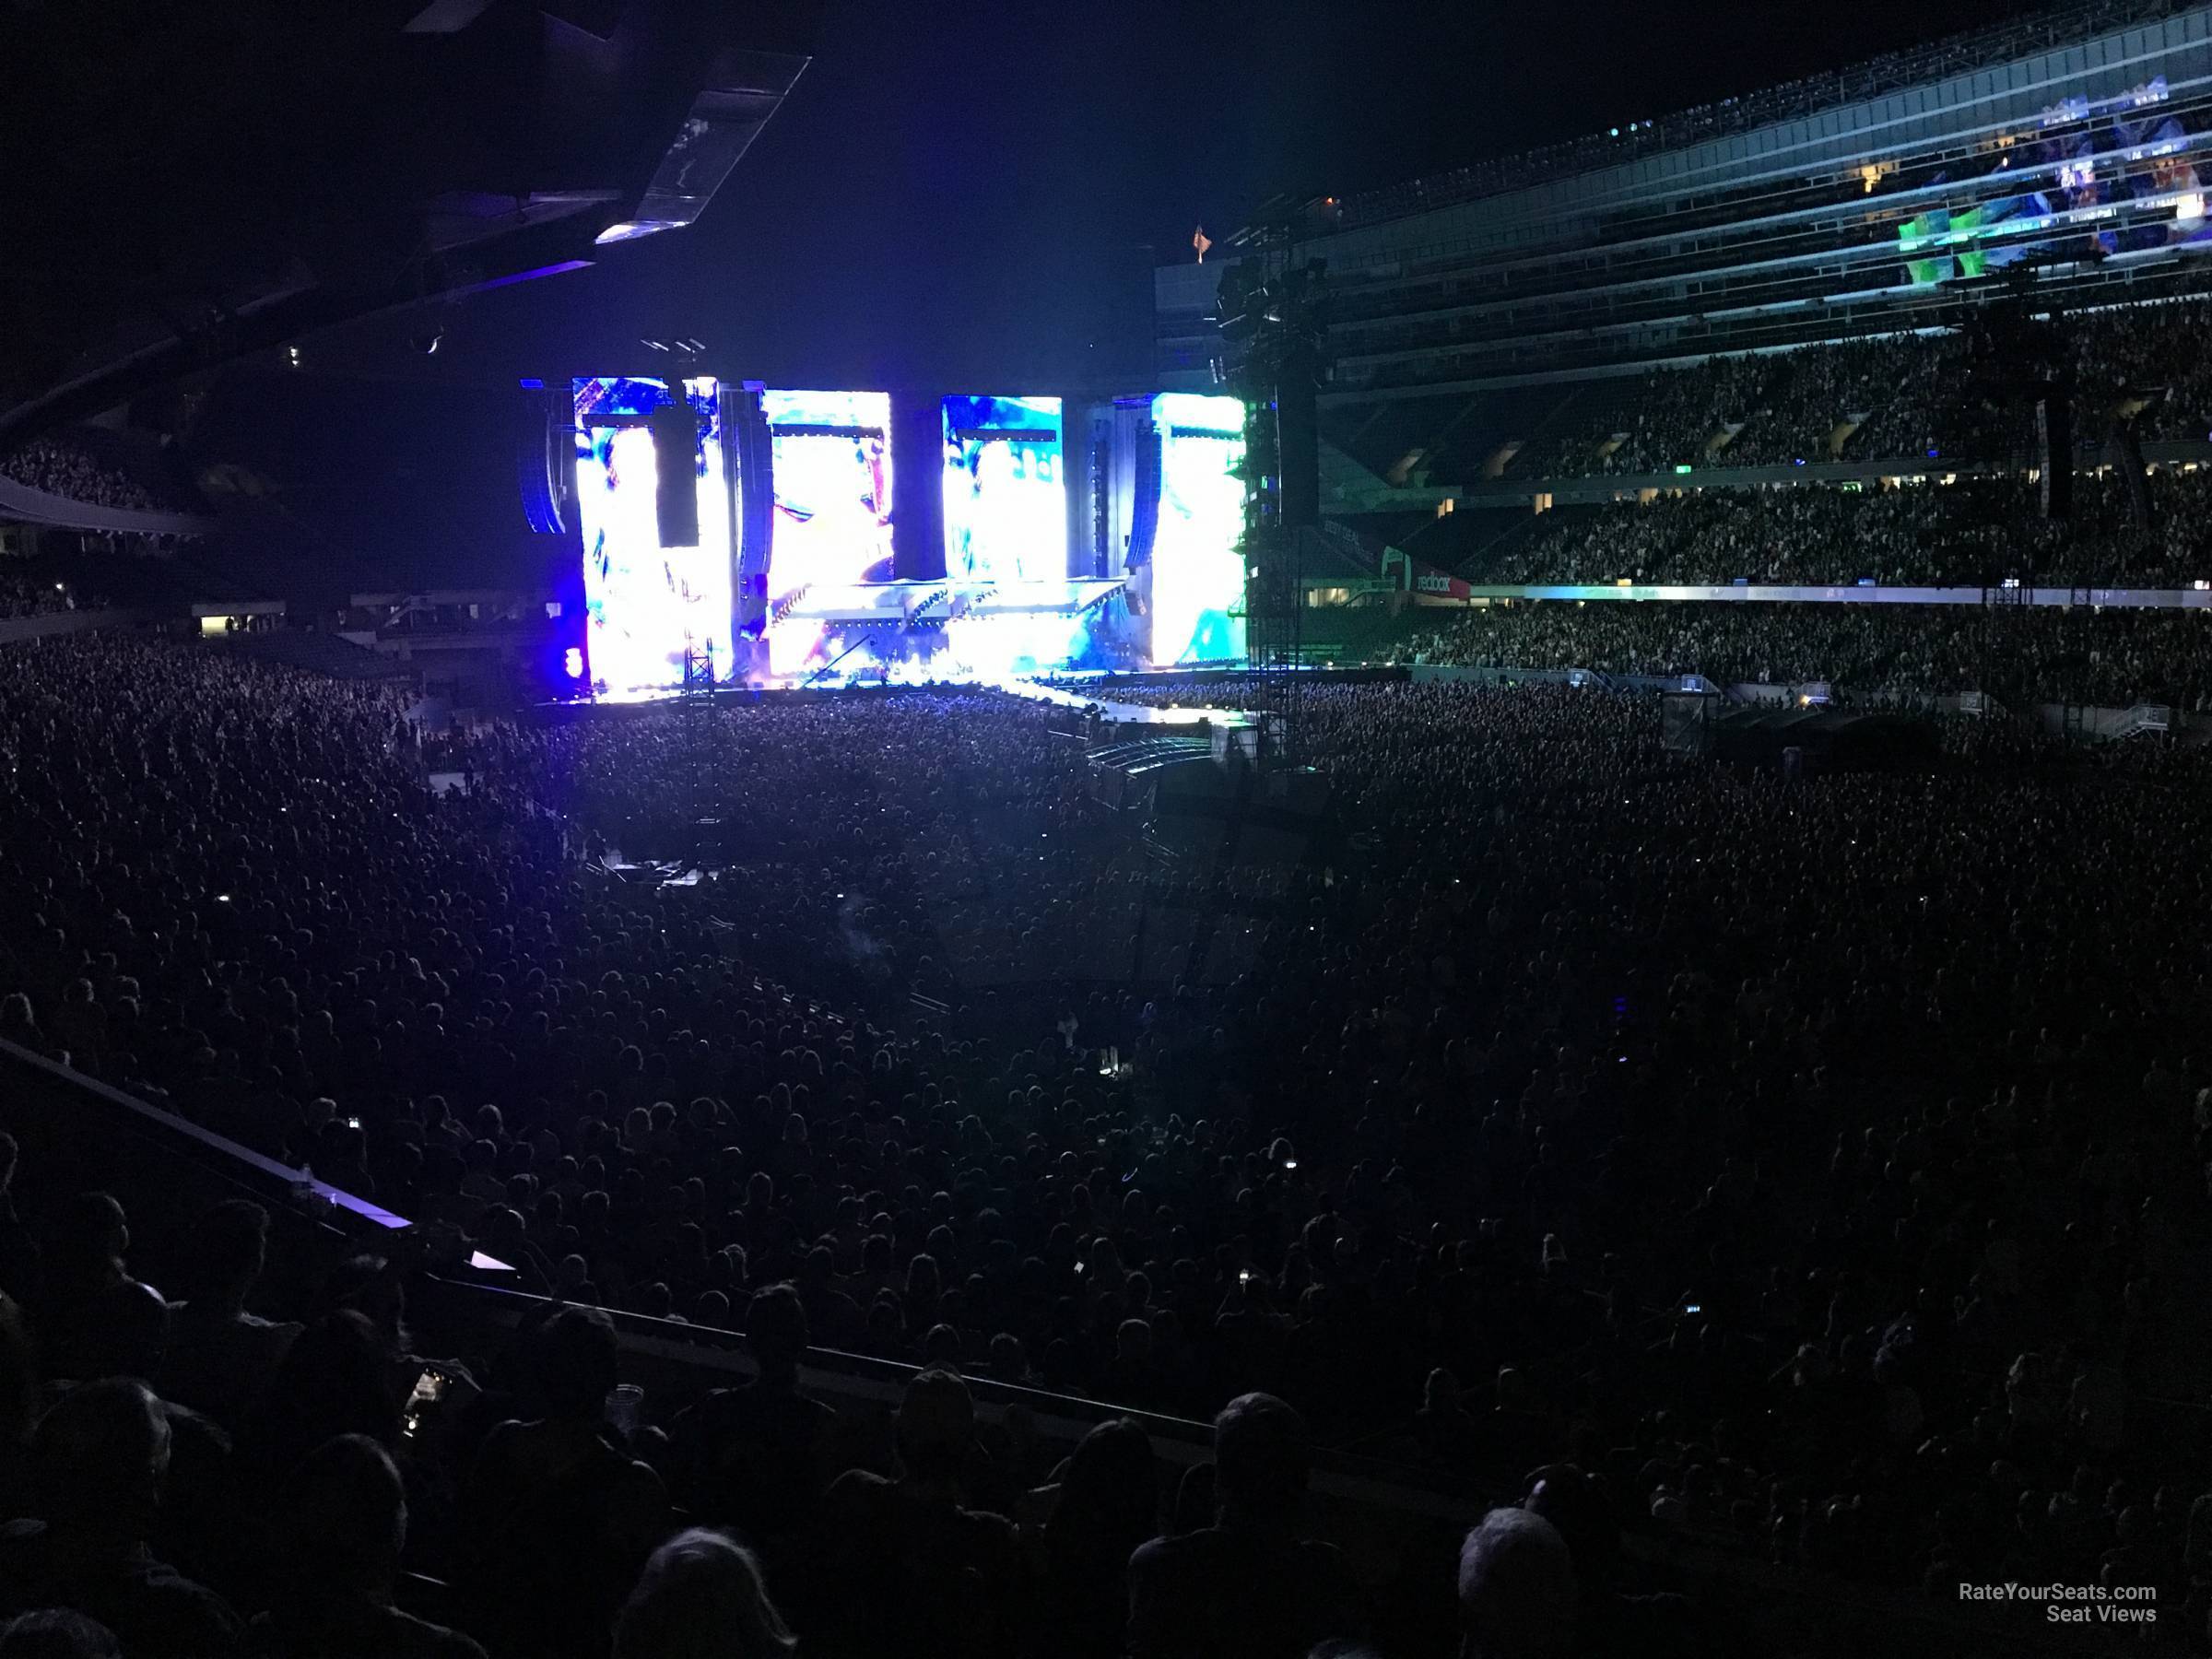 section 230, row 4 seat view  for concert - soldier field